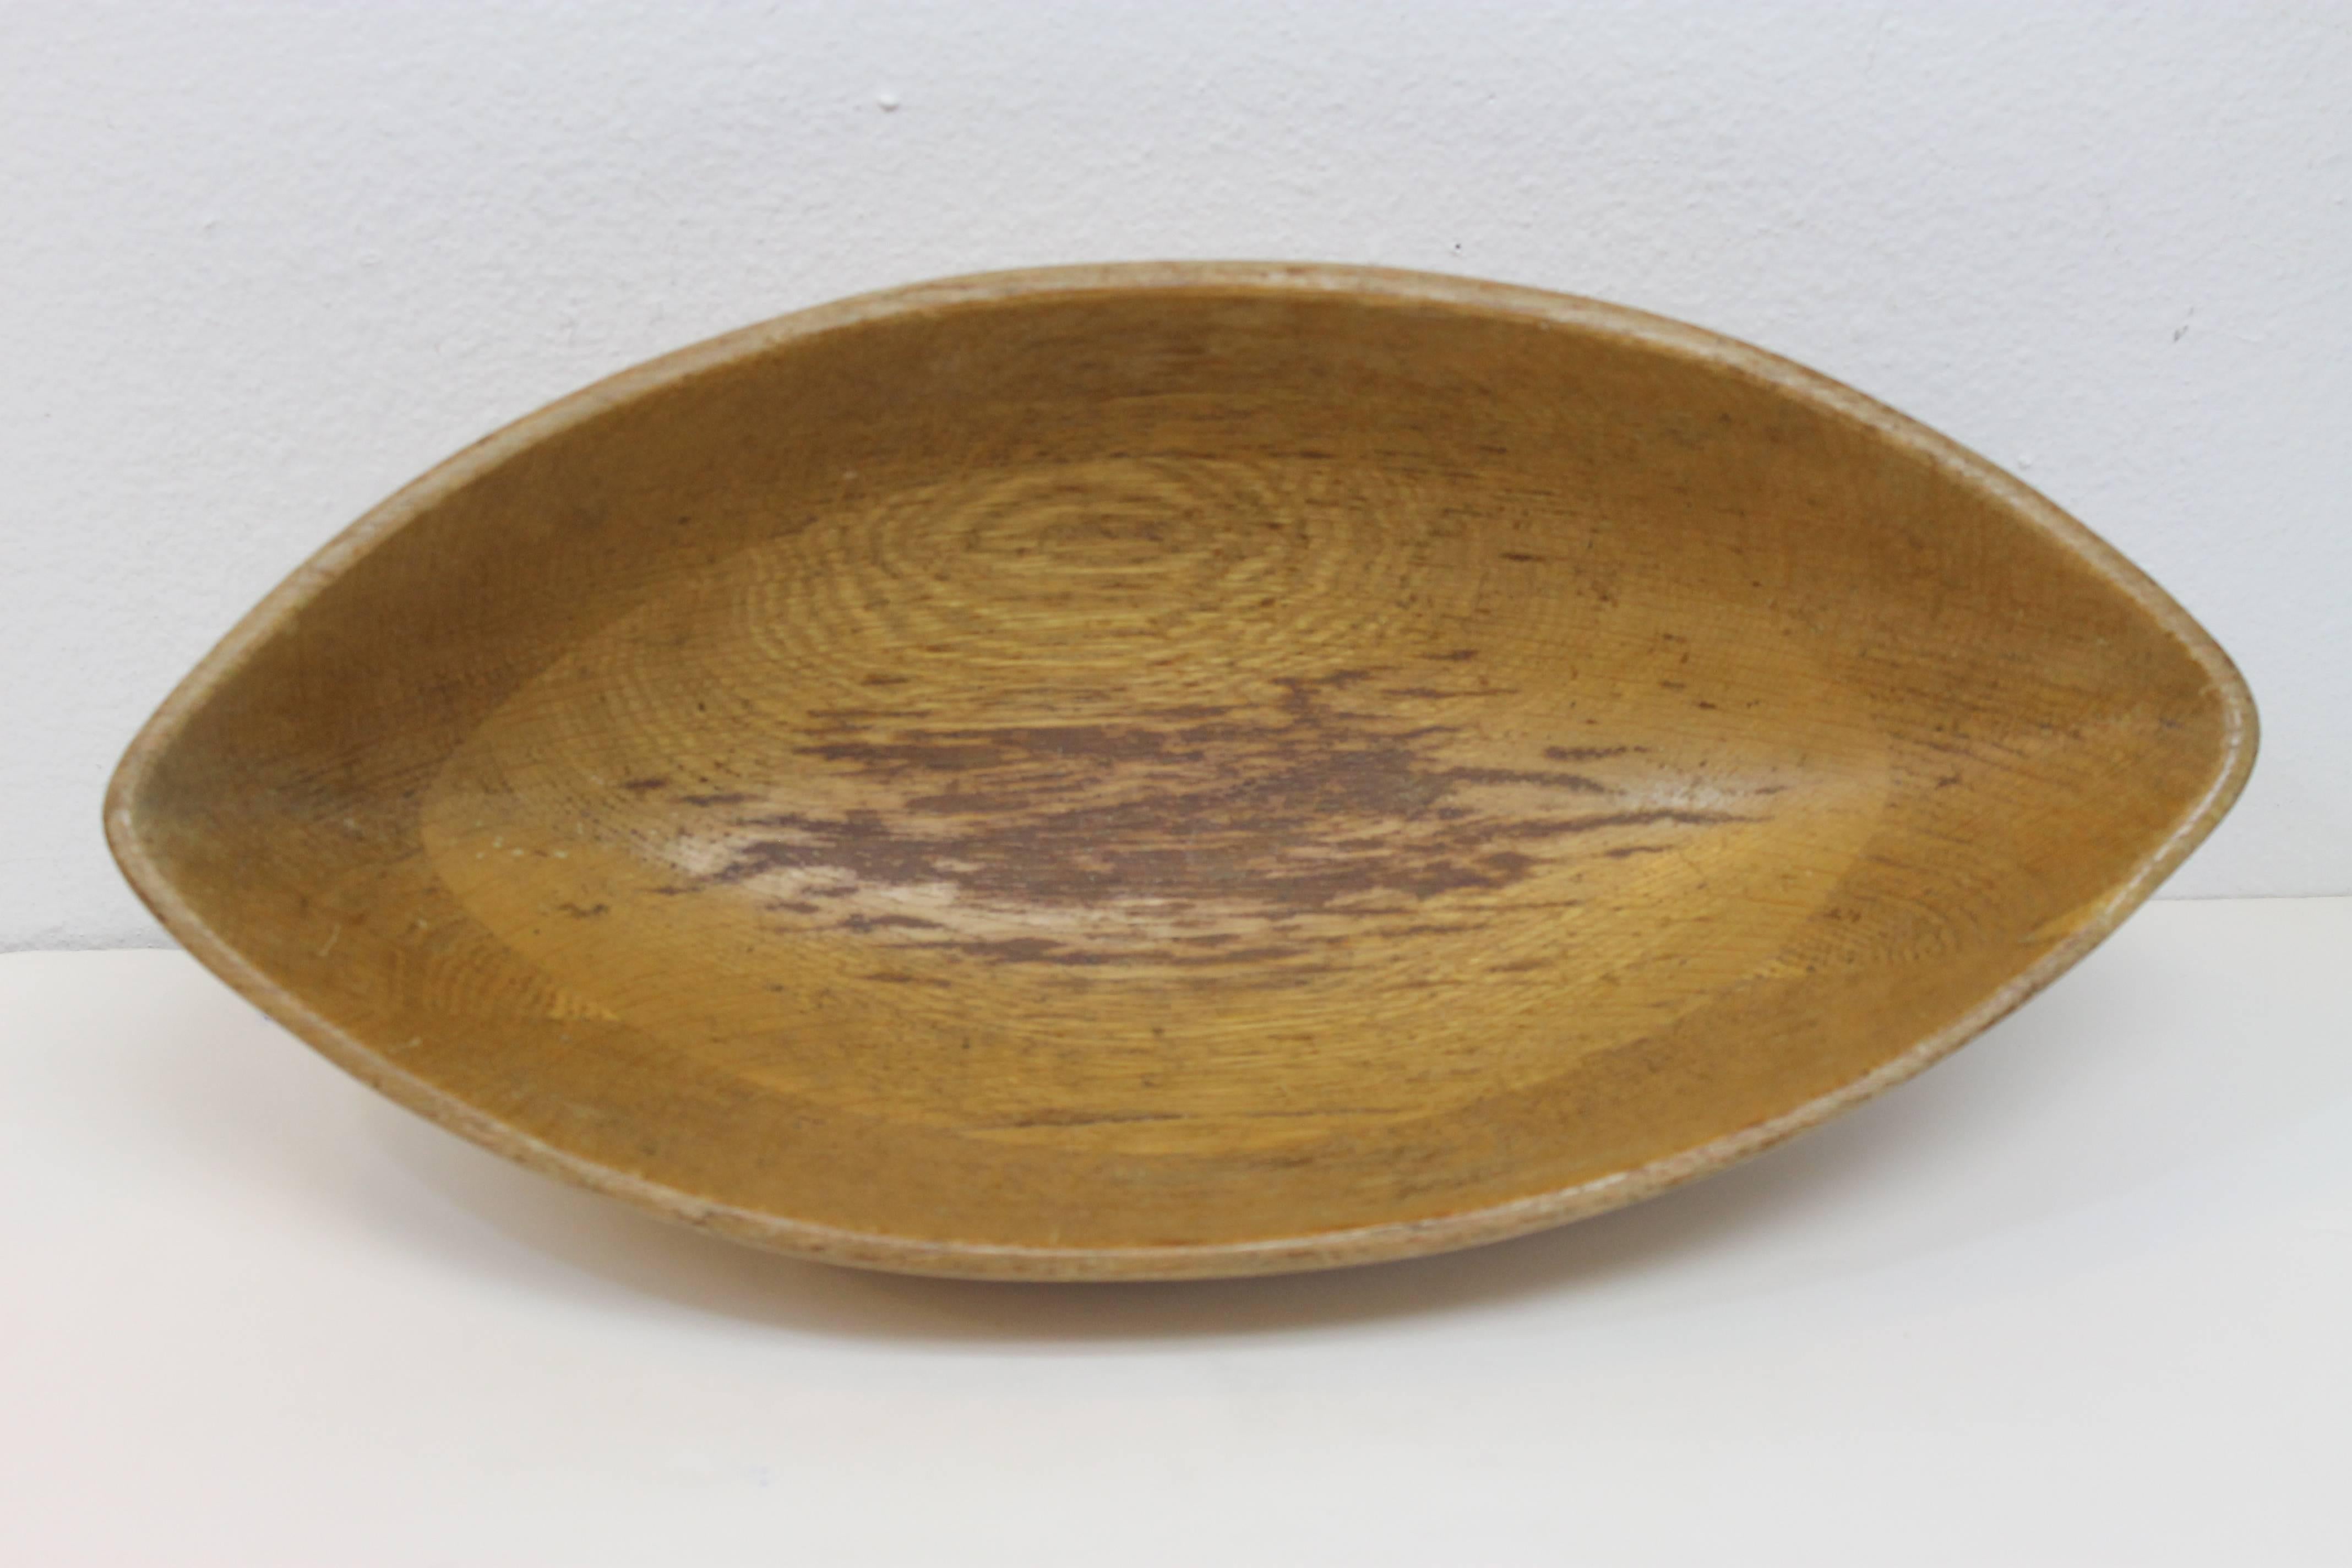 Serving bowl shaped like a football designed by Mary Wright. Part of a wood line designed by husband and wife Industrial designers Russel Wright / Mary Wright. Measures 15.75